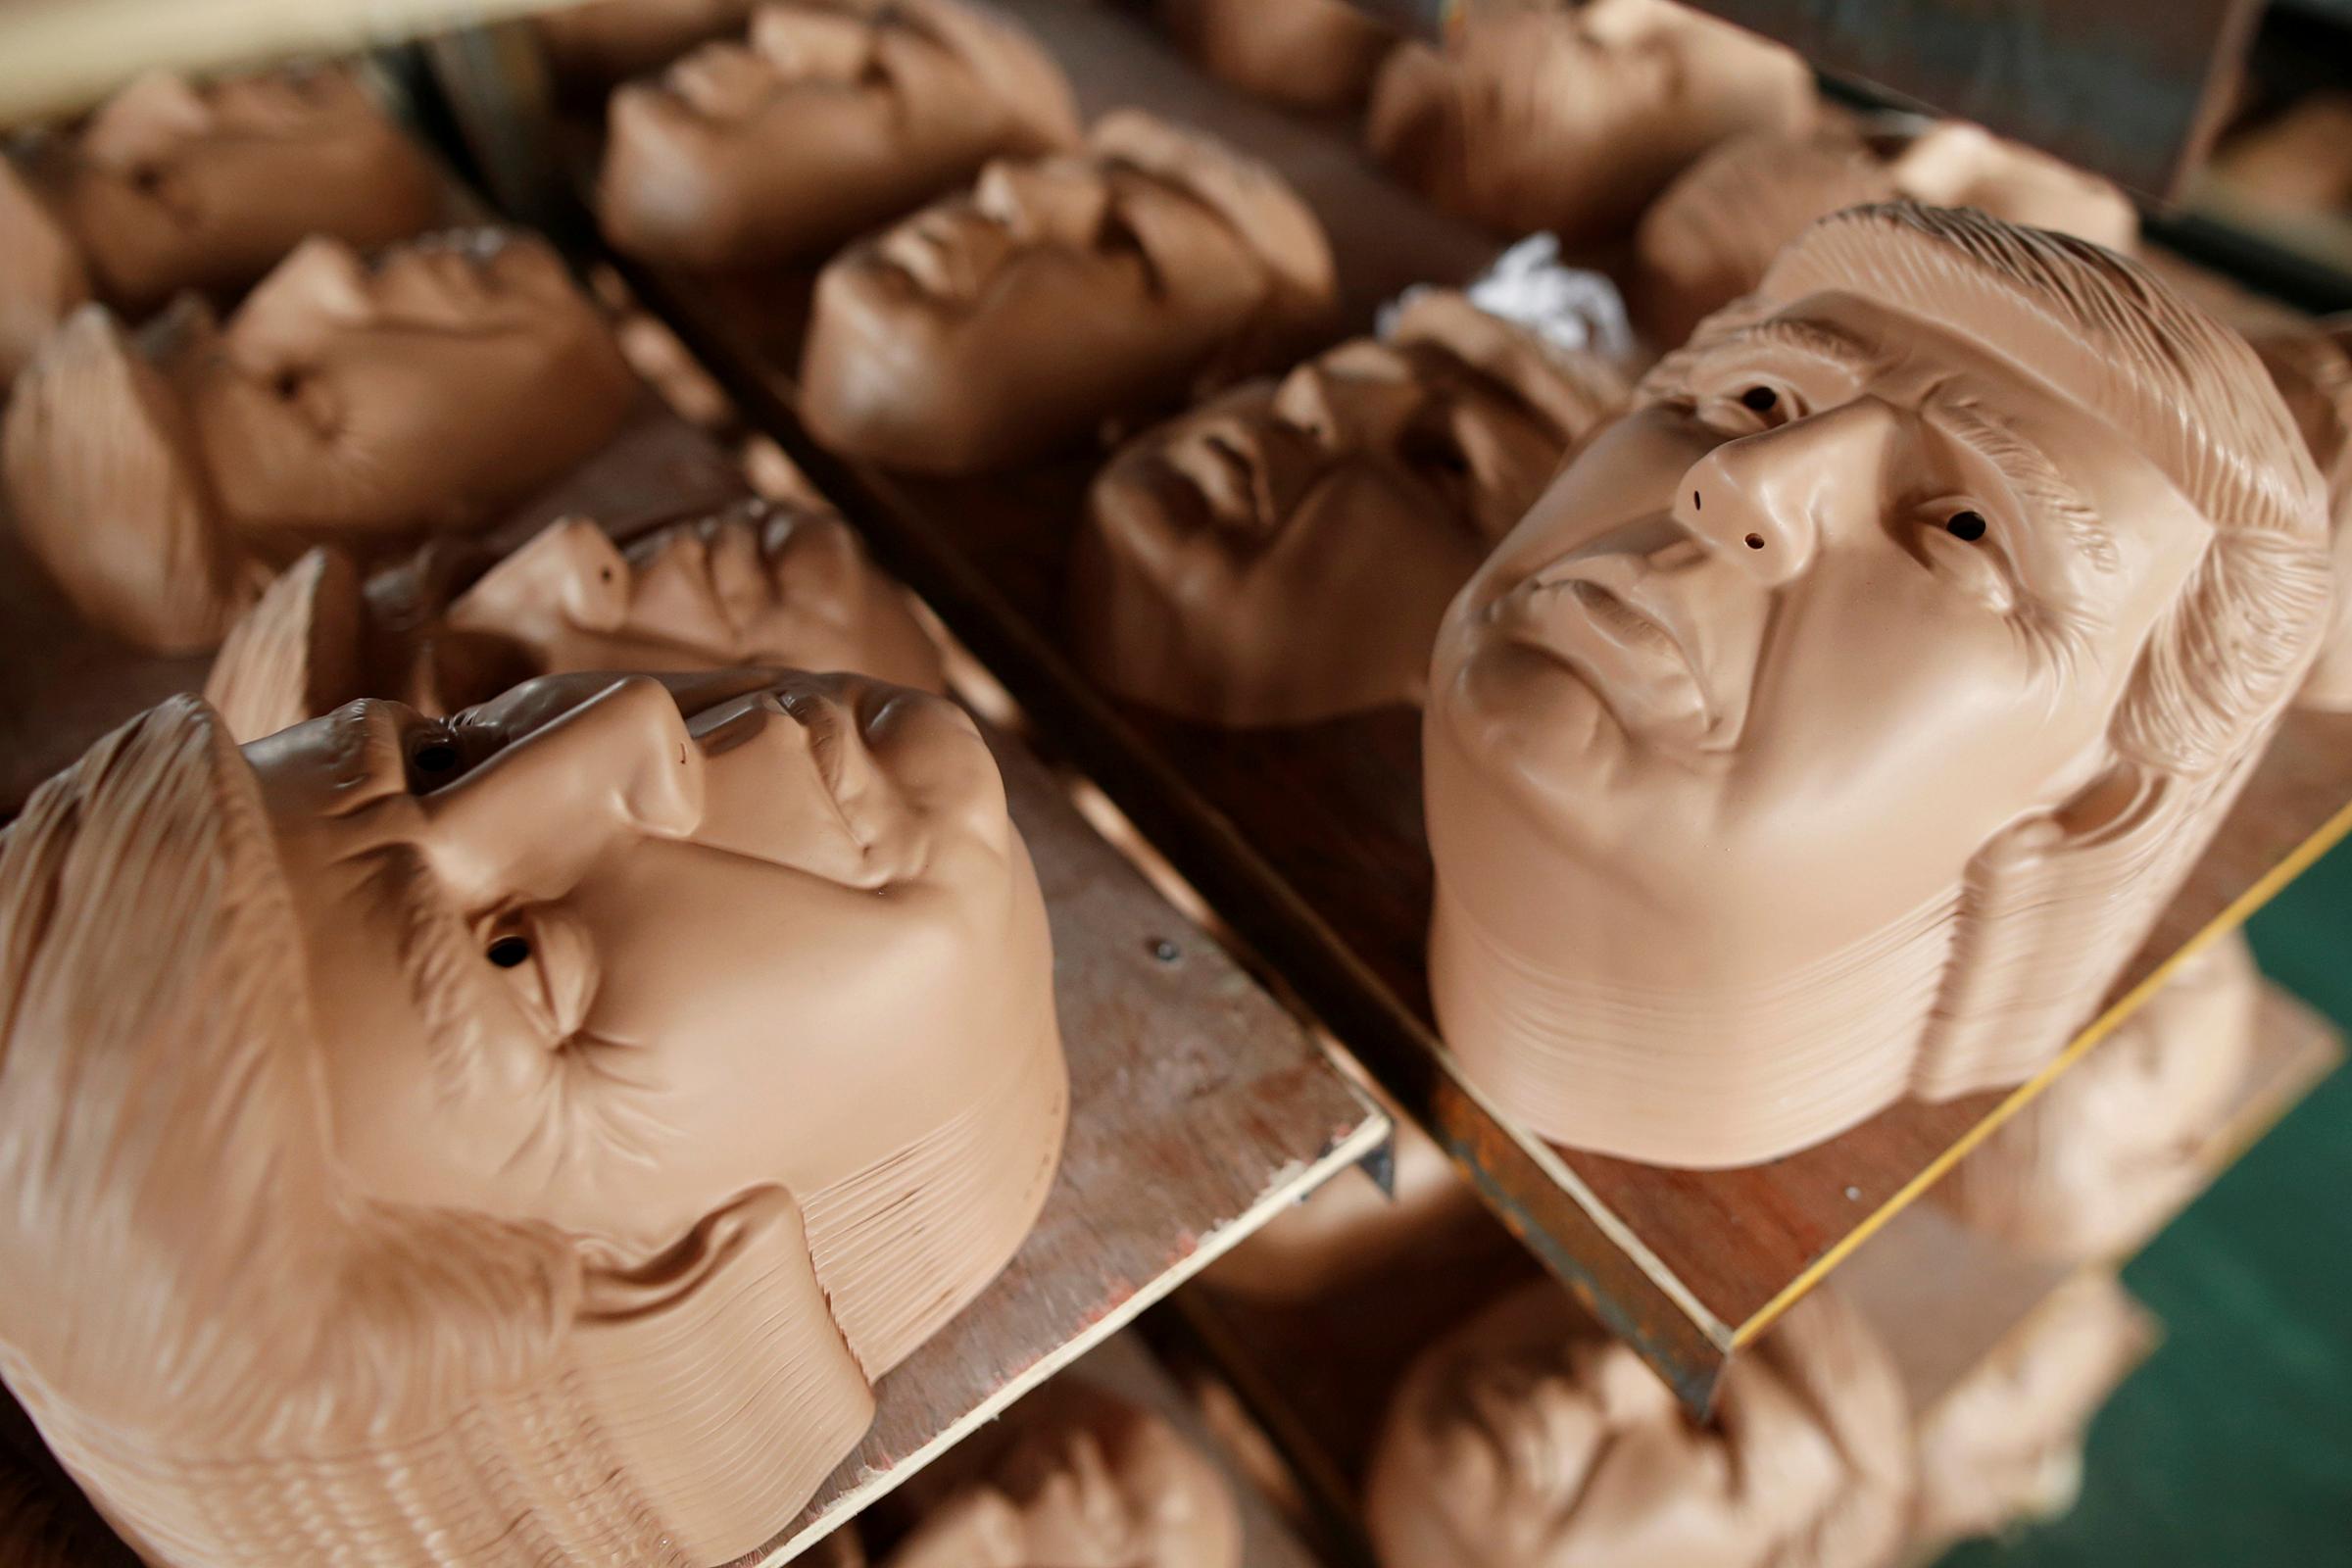 Masks of Republican presidential candidate Donald Trump dry on shelves at Jinhua Partytime Latex Art and Crafts Factory in Jinhua, Zhejiang Province, China, May 25, 2016.